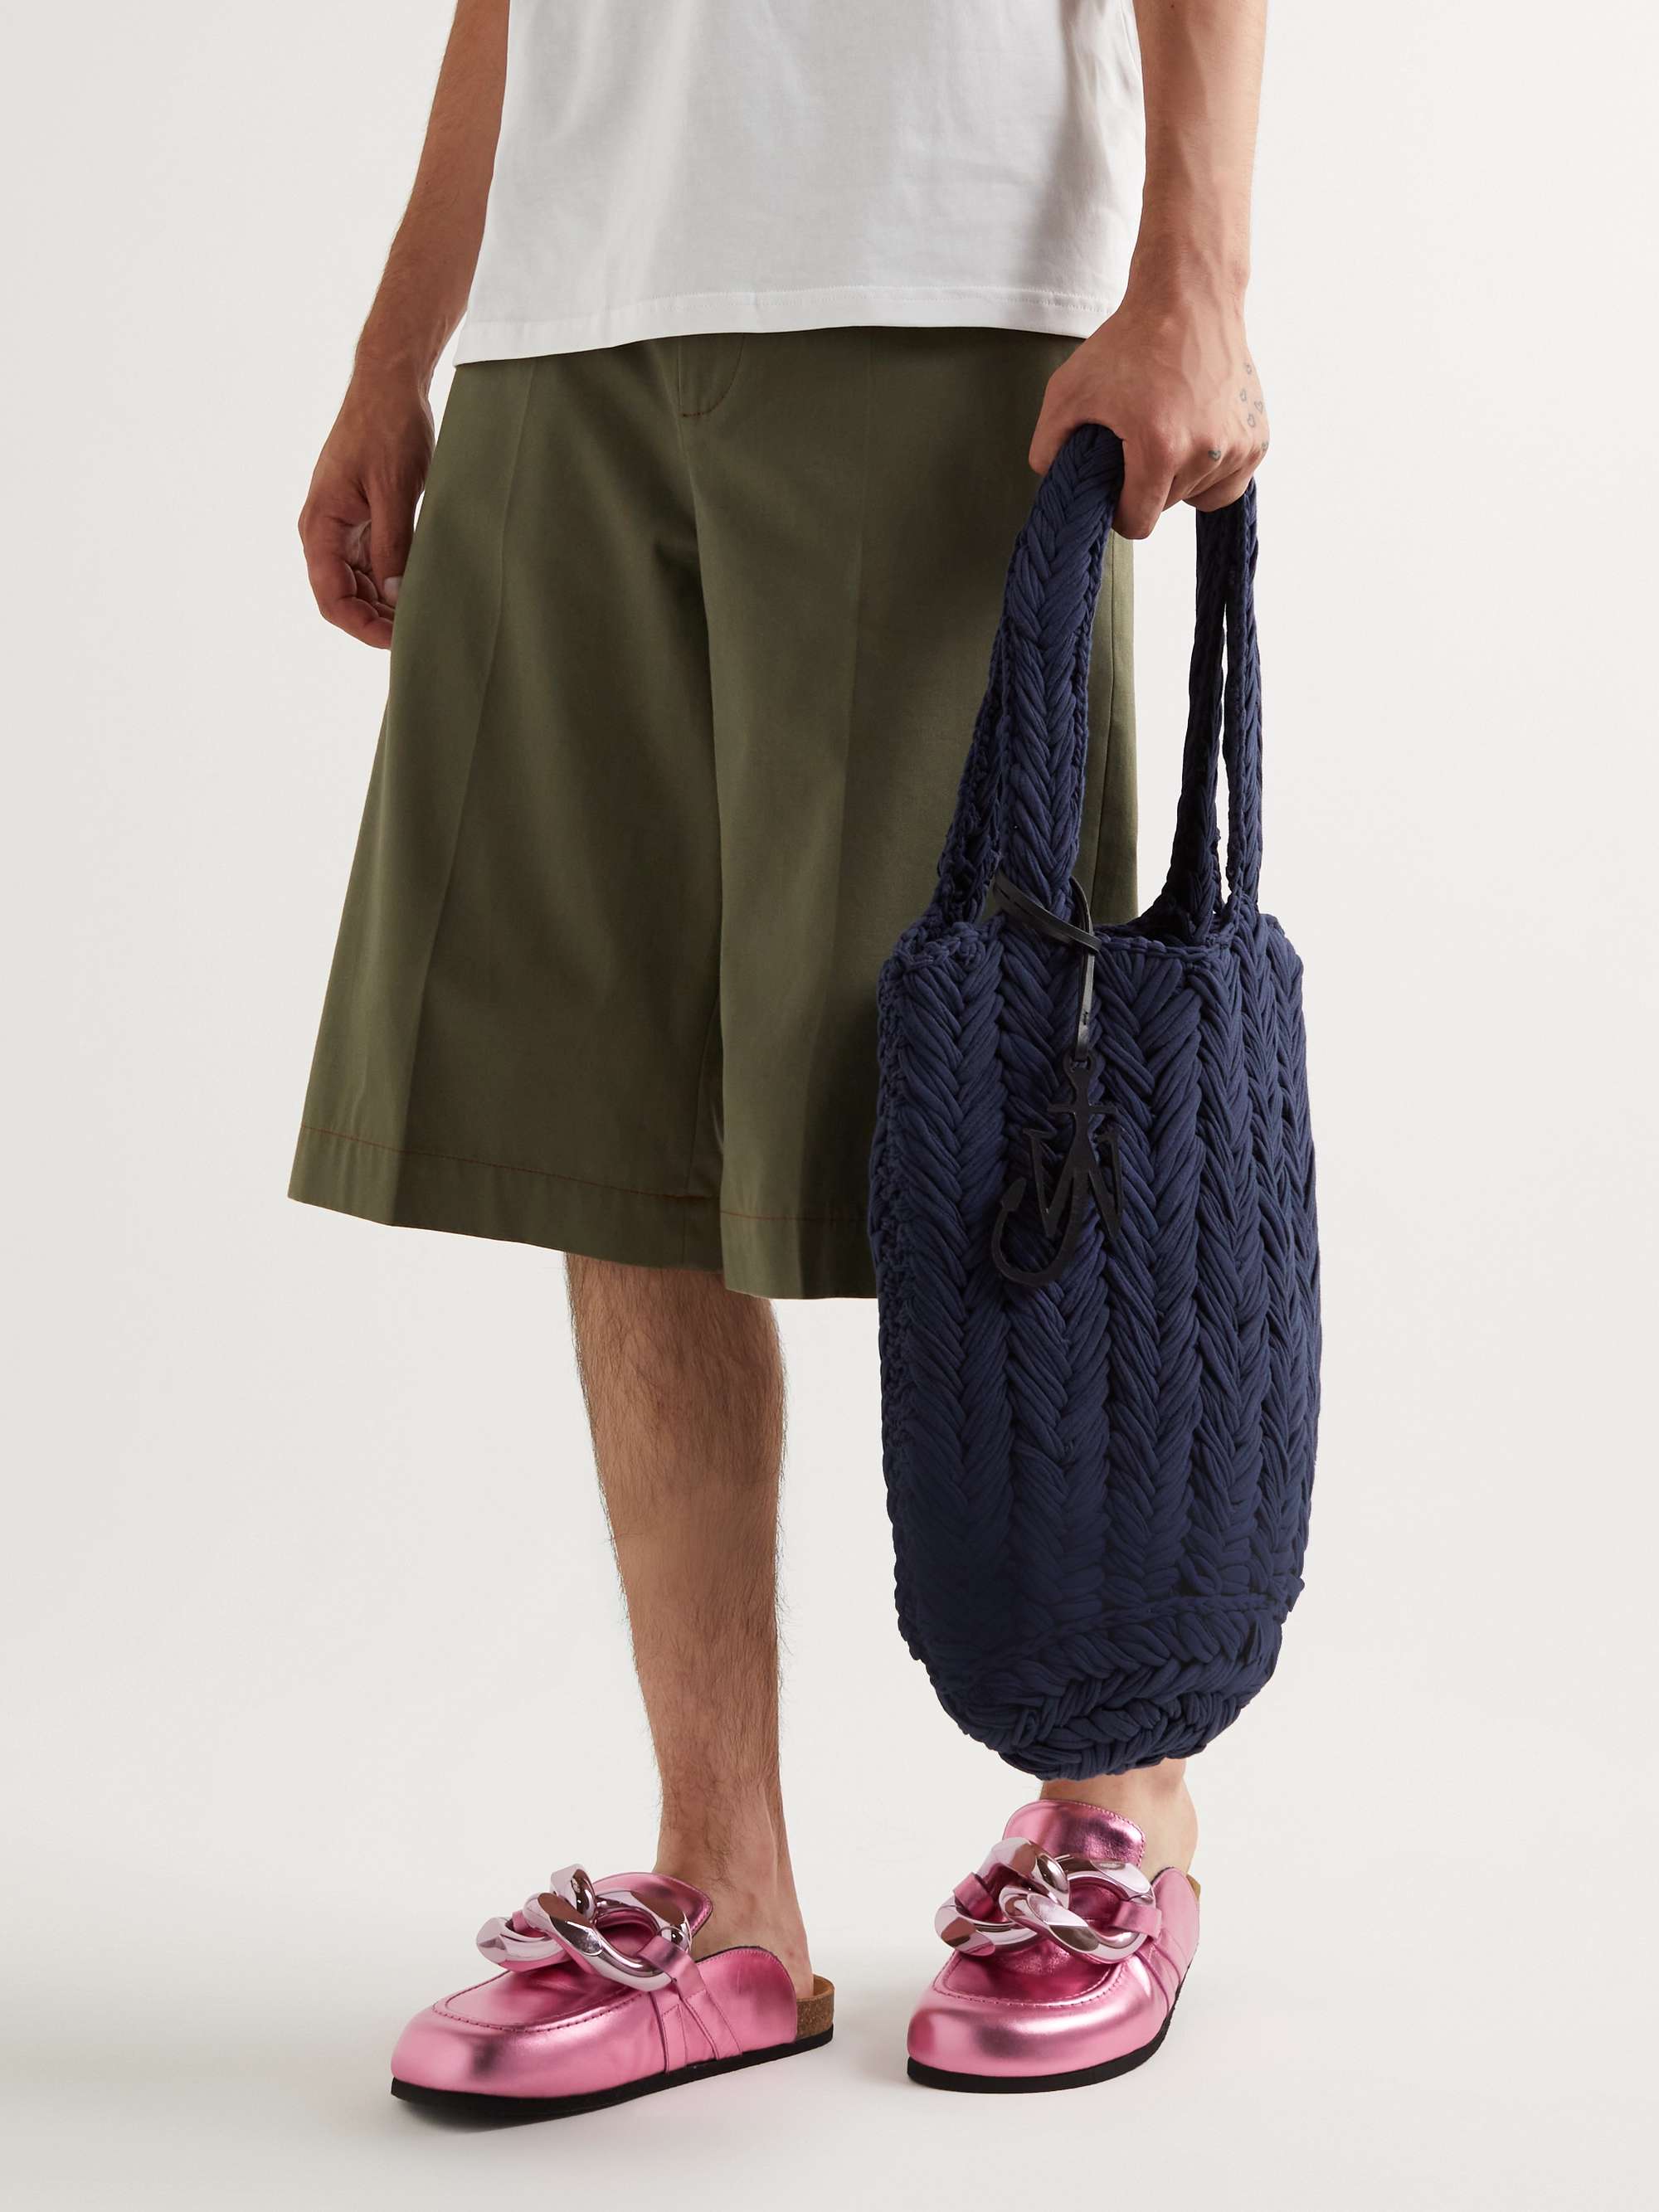 JW ANDERSON Reversible Leather-Trimmed Crocheted Cotton Tote Bag